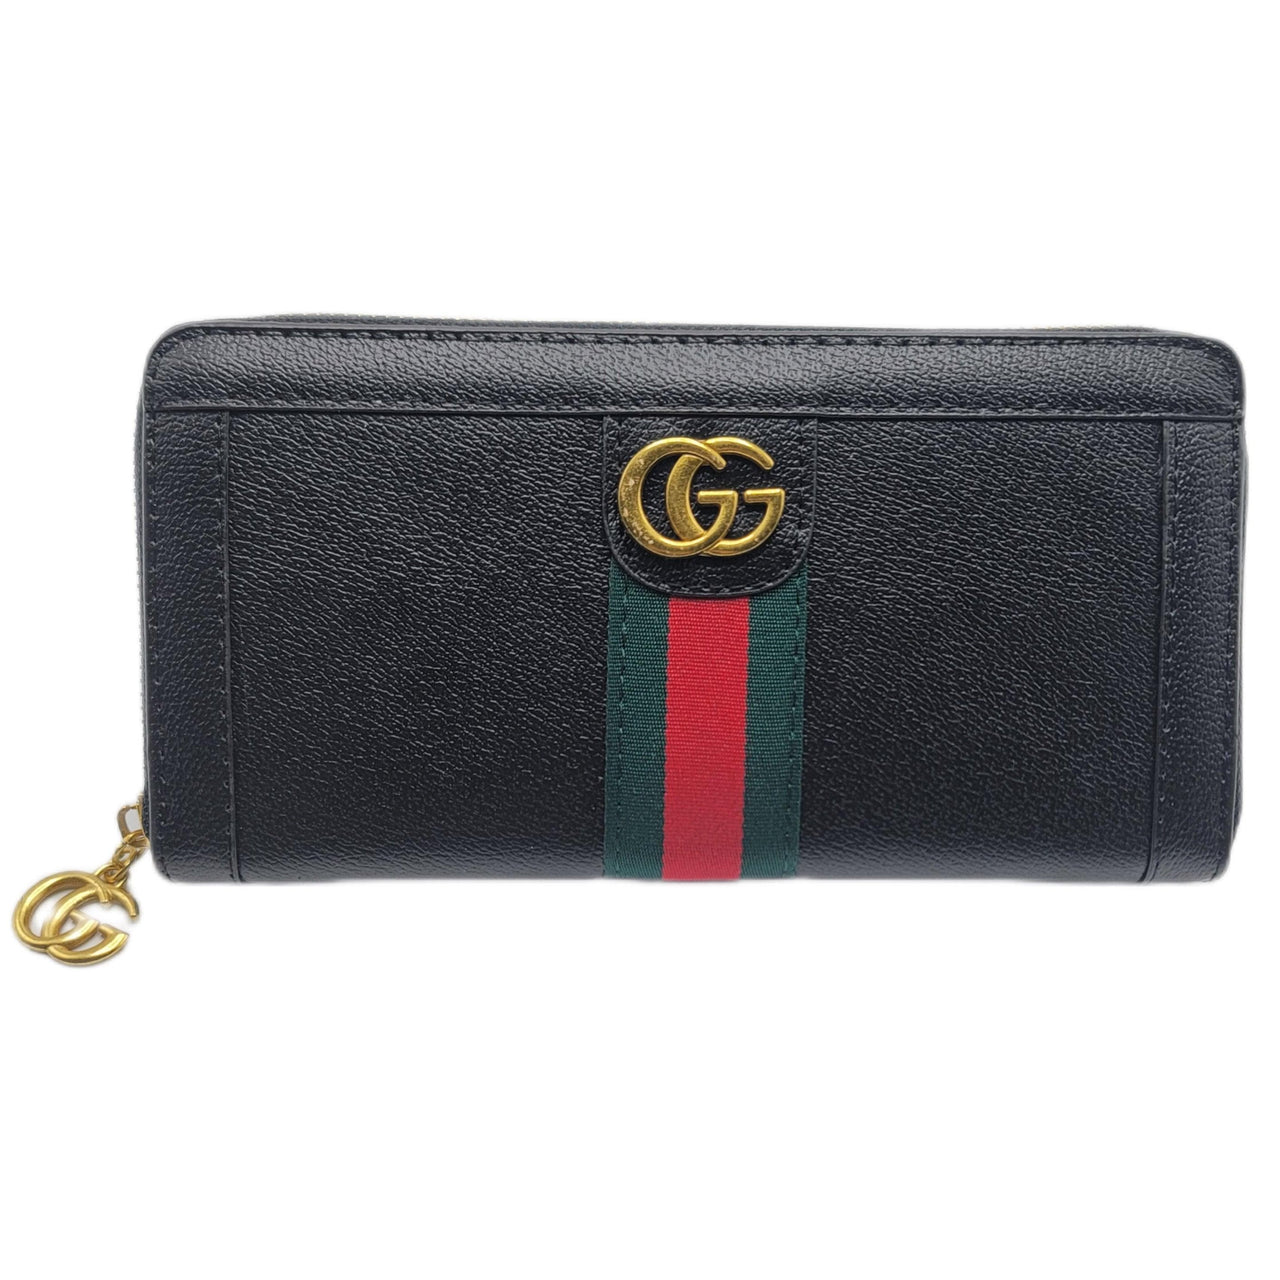 The Bag Couture Luggage & Bags Gucci Zip Wallet Black Classic Black